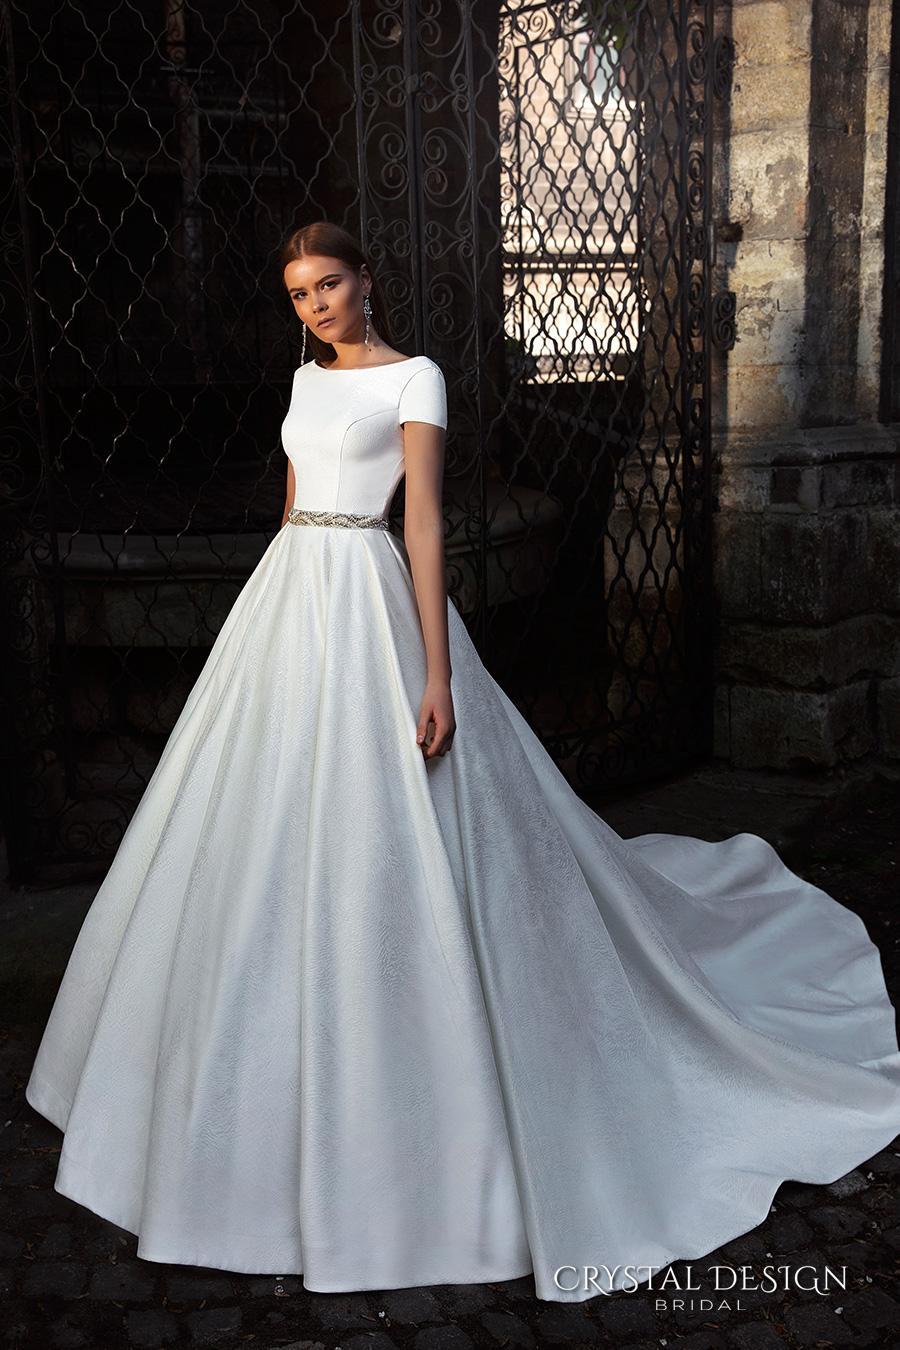 Mariage - New Arrival Short Sleeve Backless Crystal Design 2016 Wedding Dresses Beaded Sash Bridal Ball Gowns Wedding Dress Online with $116.84/Piece on Hjklp88's Store 